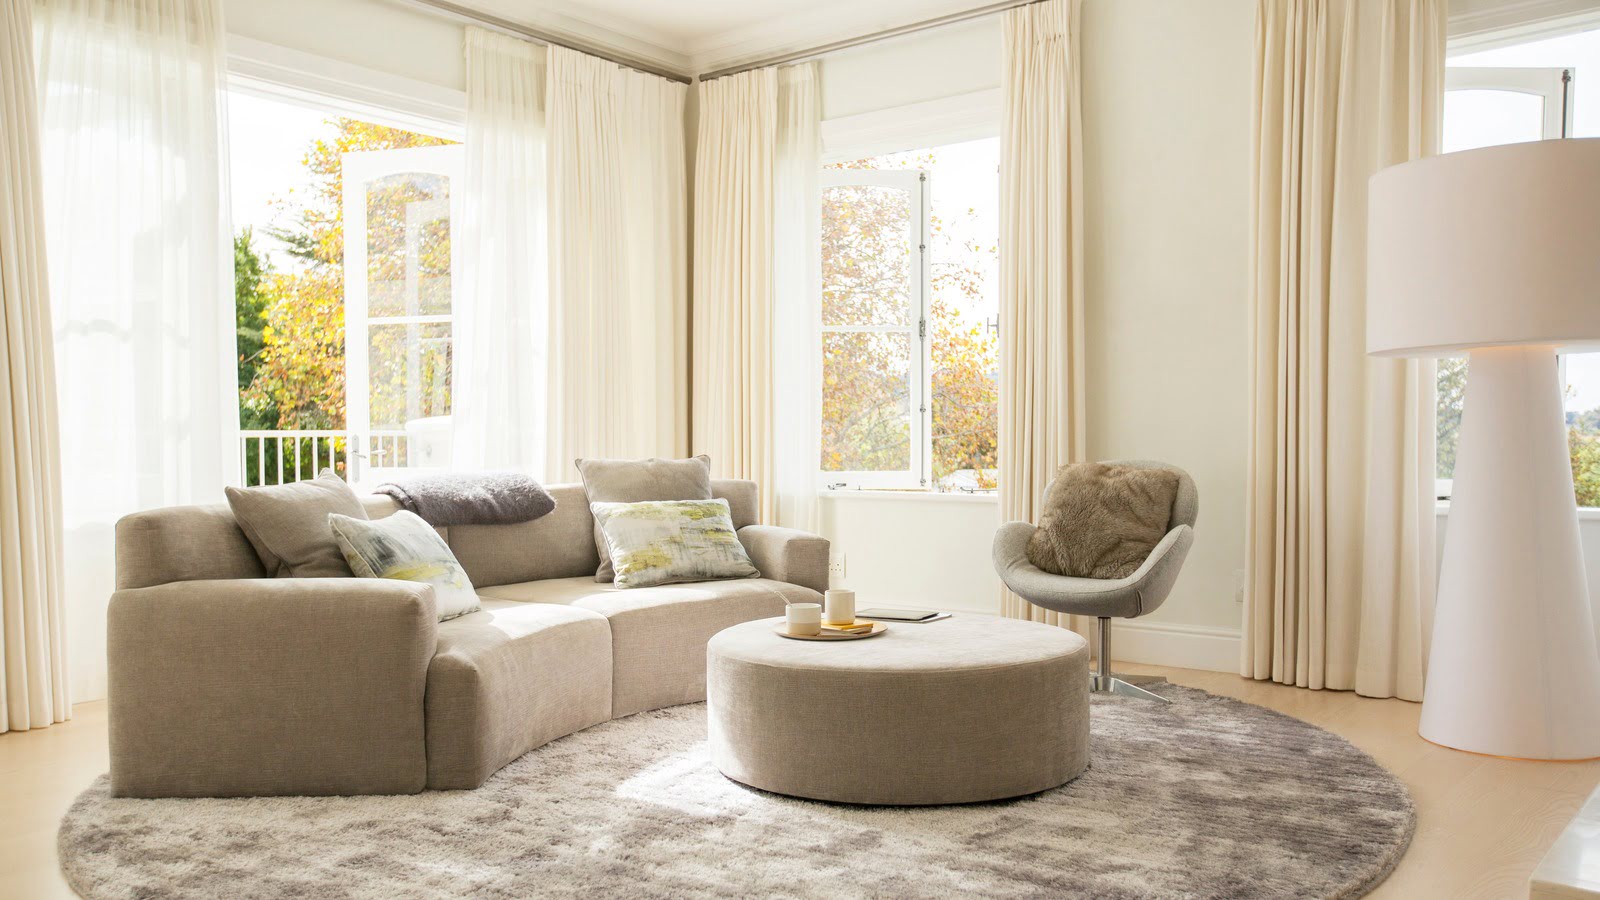 How To Place A Round Rug In A Living Room